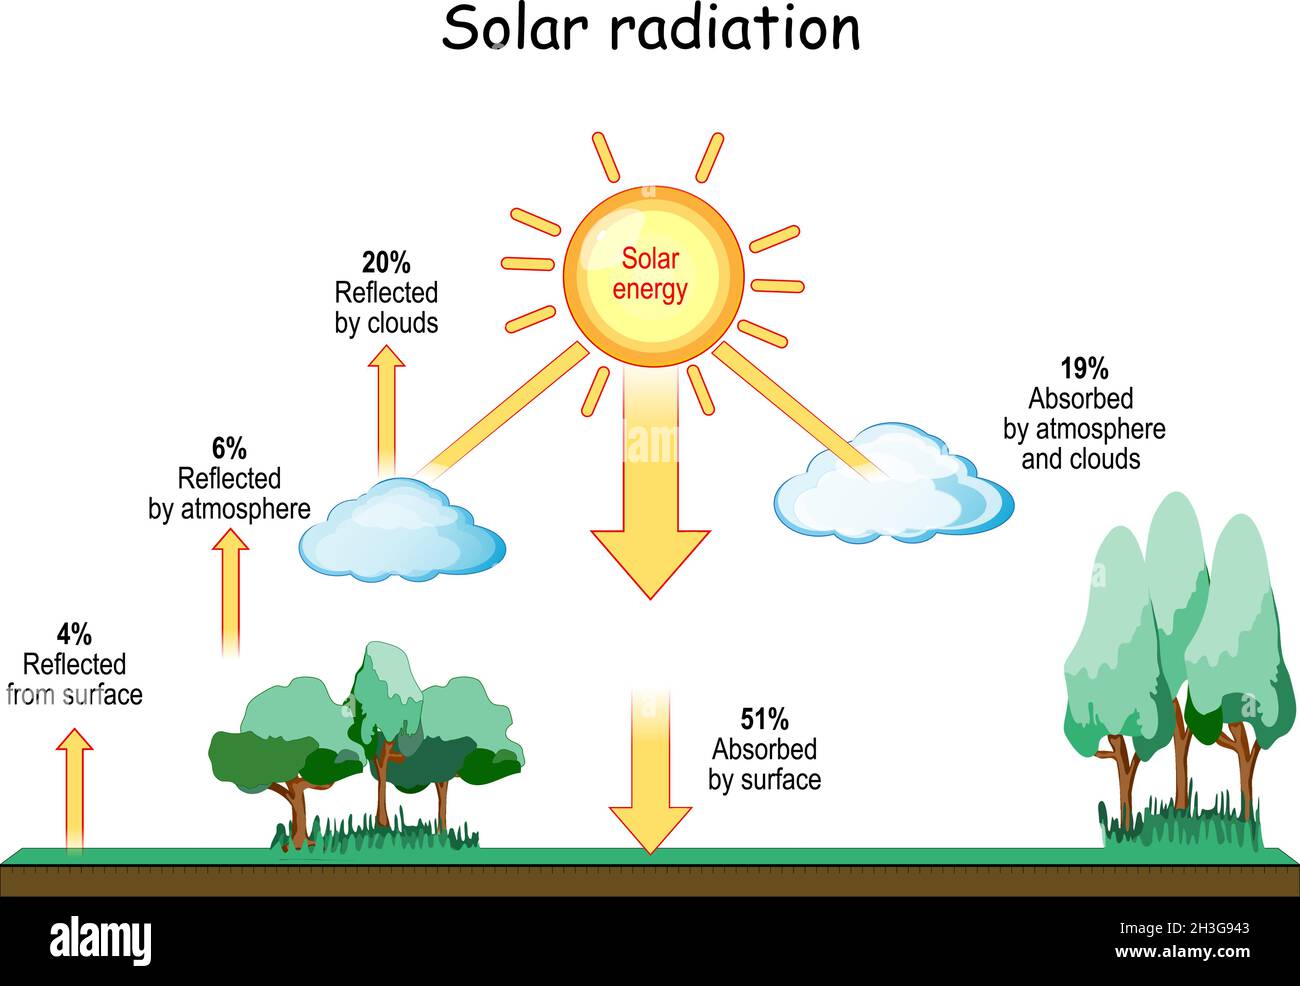 Solar Radiation and Climate. Meteorology. Insolation and Heat Balance of the Earth. Terrestrial radiation. solar waves. vector Stock Vector